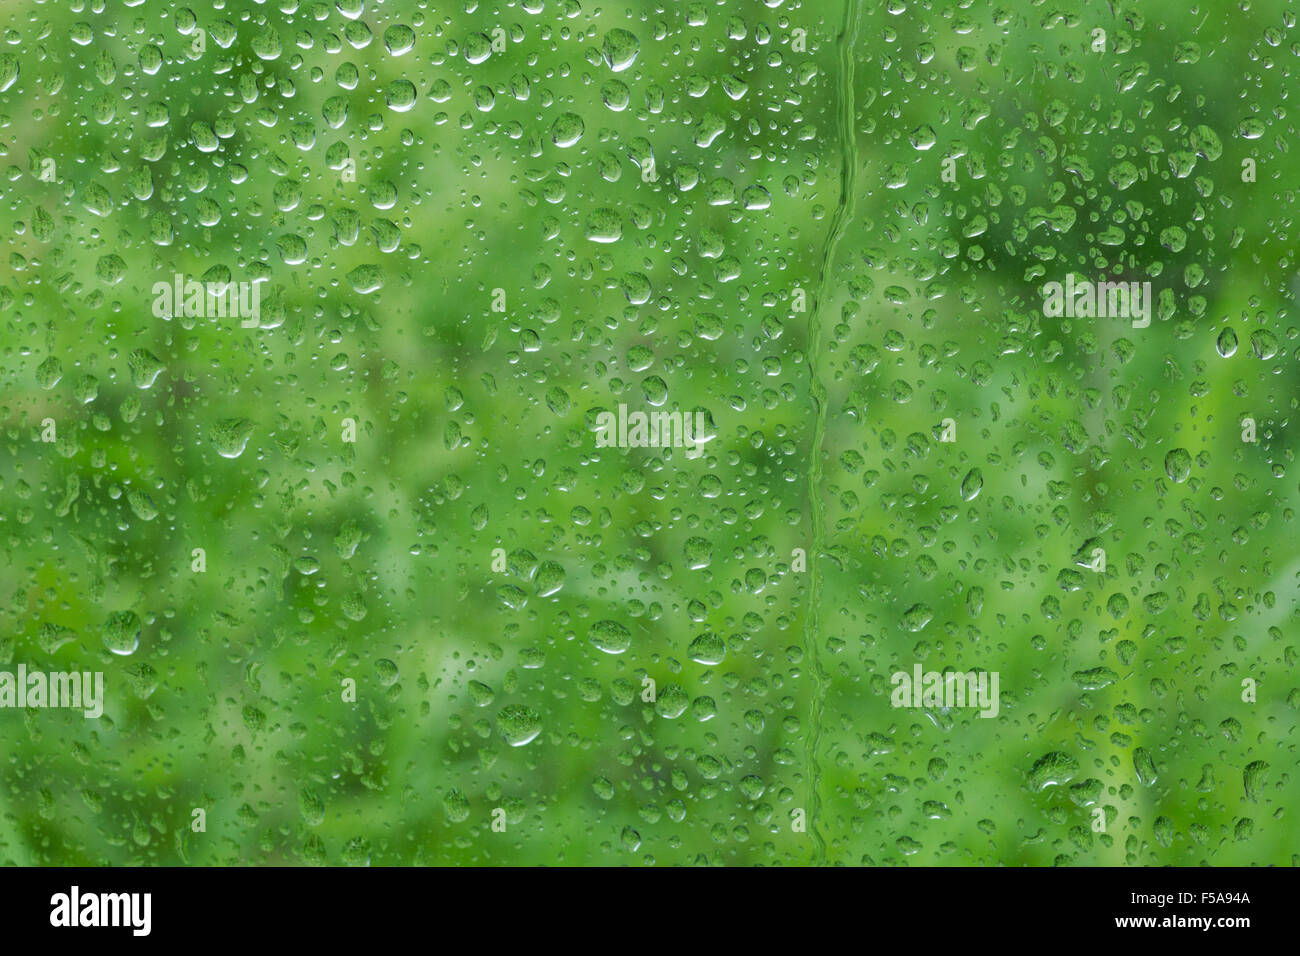 rain drops on a window with green plants behind Stock Photo